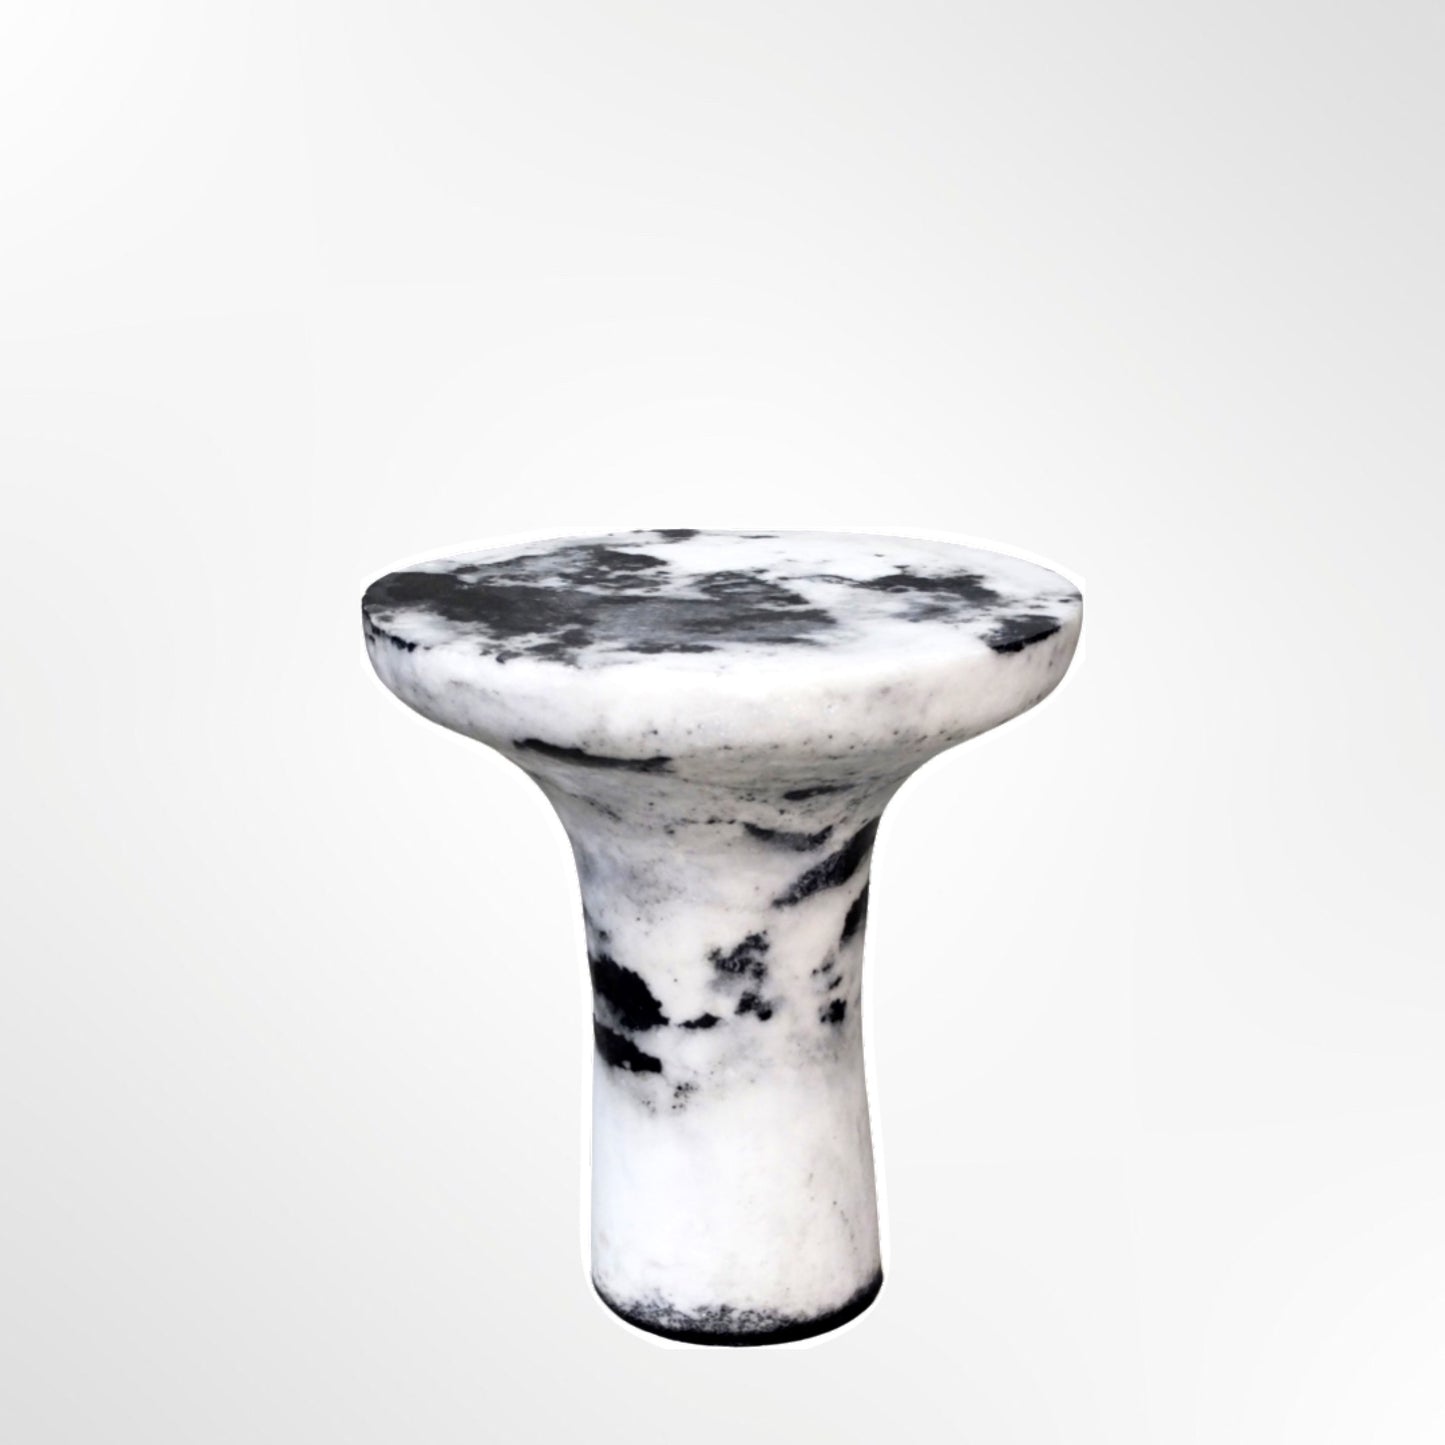 Marbled Salt Sculpted Table Shades of Grey